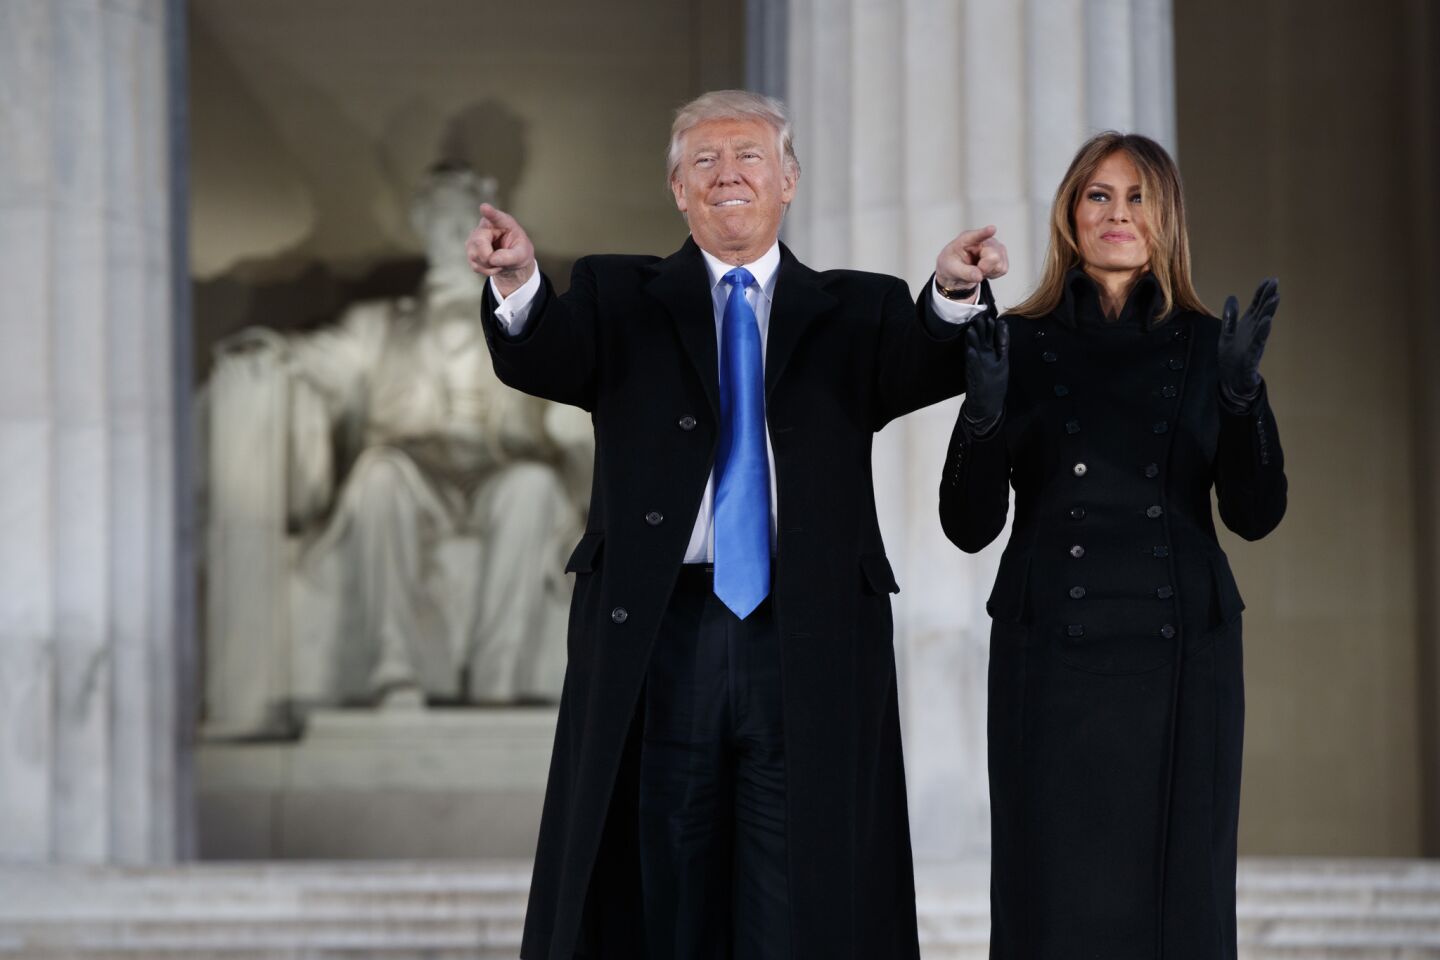 President-elect Donald Trump, left, and his wife, Melania Trump, arrive to the "Make America Great Again Welcome Concert" at the Lincoln Memorial on Thursday.